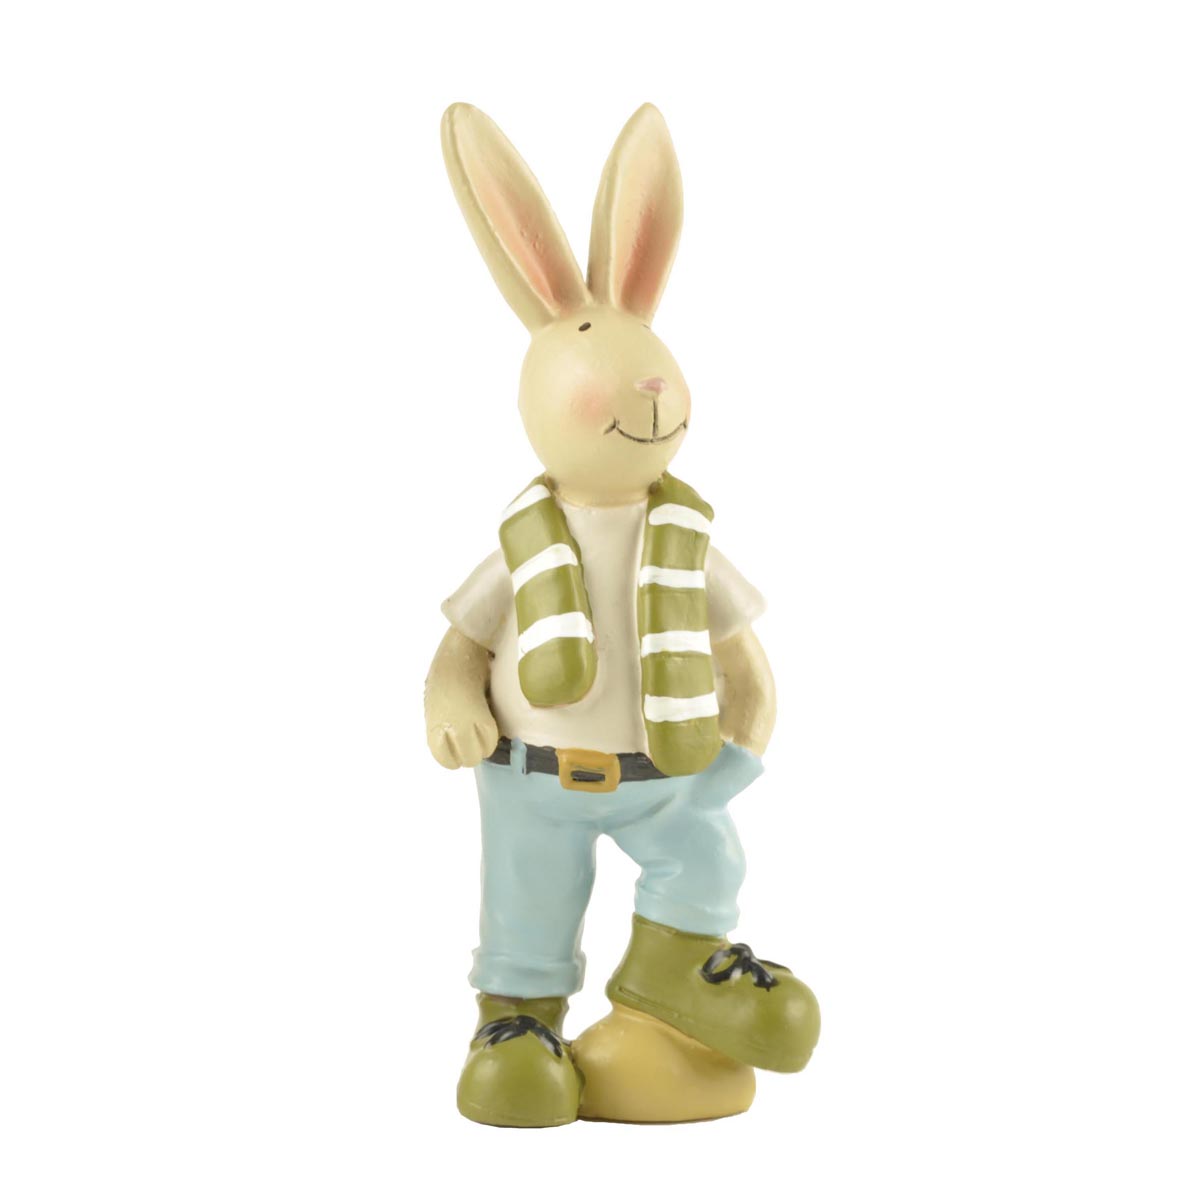 Ennas easter rabbit statues for holiday gift